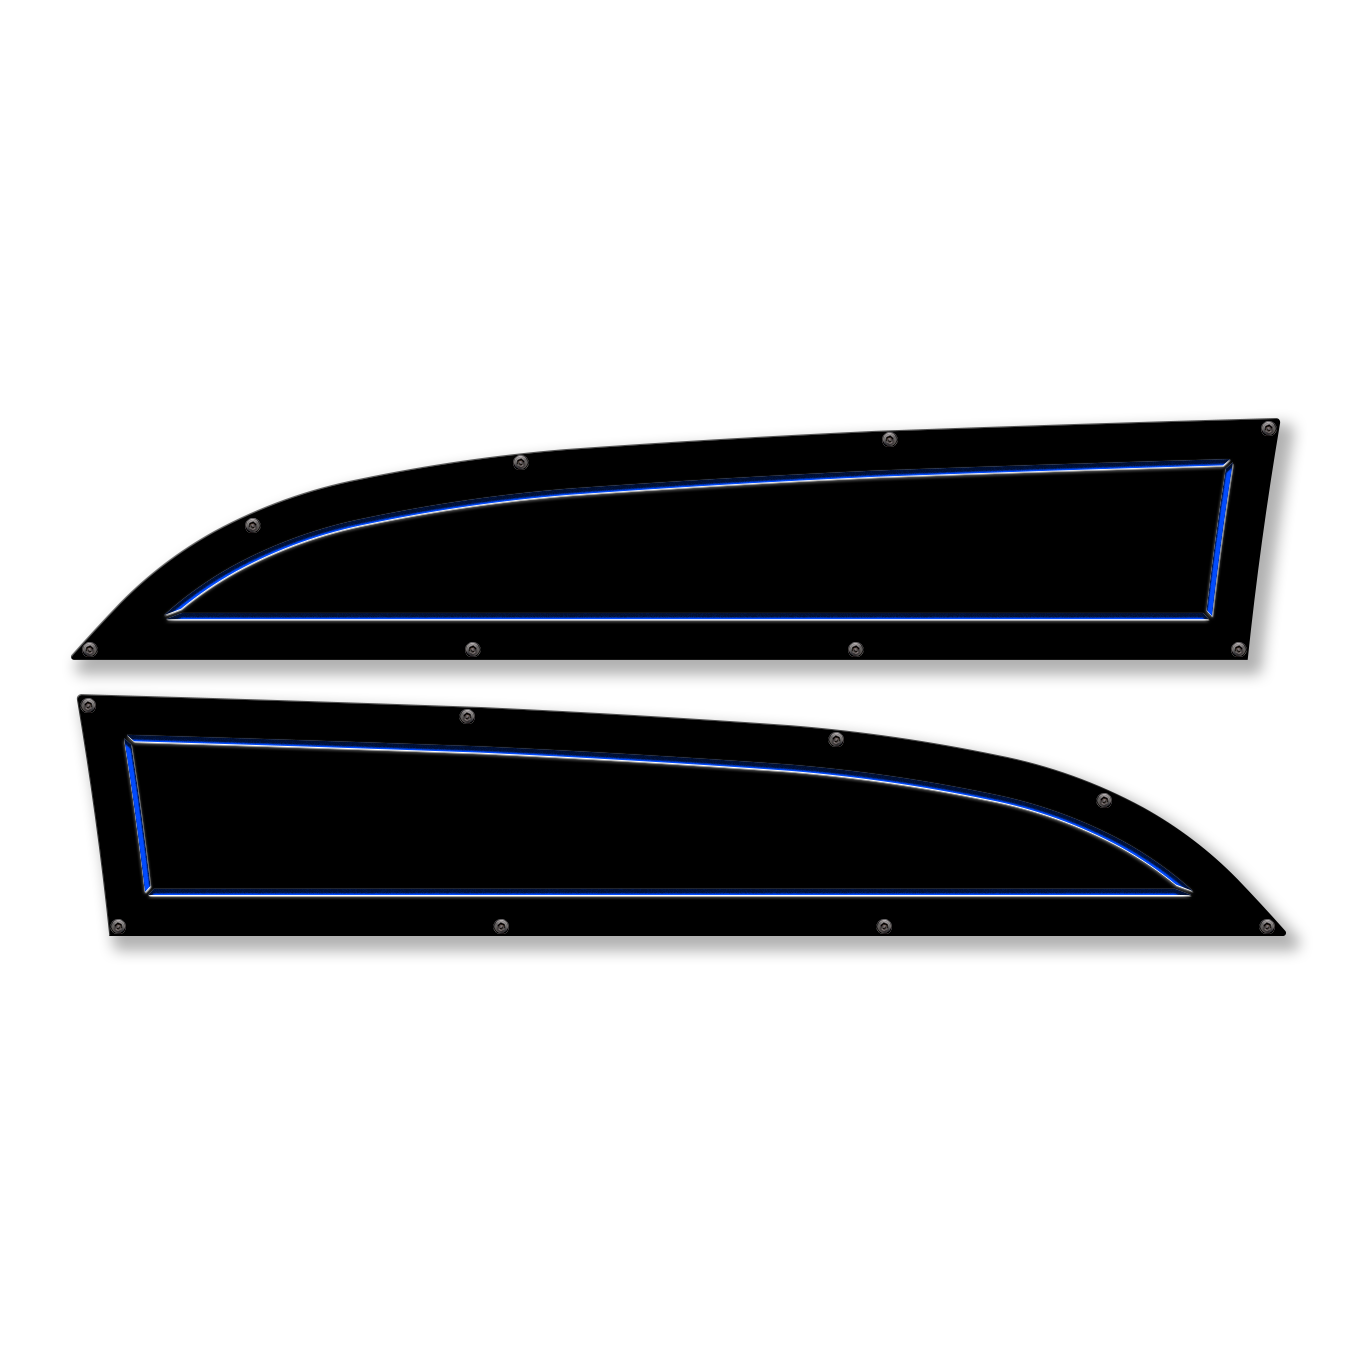 Border 11-16 Ford® Super Duty® Fender Badge Replacements - Fully Customizable, LED and Non-LED